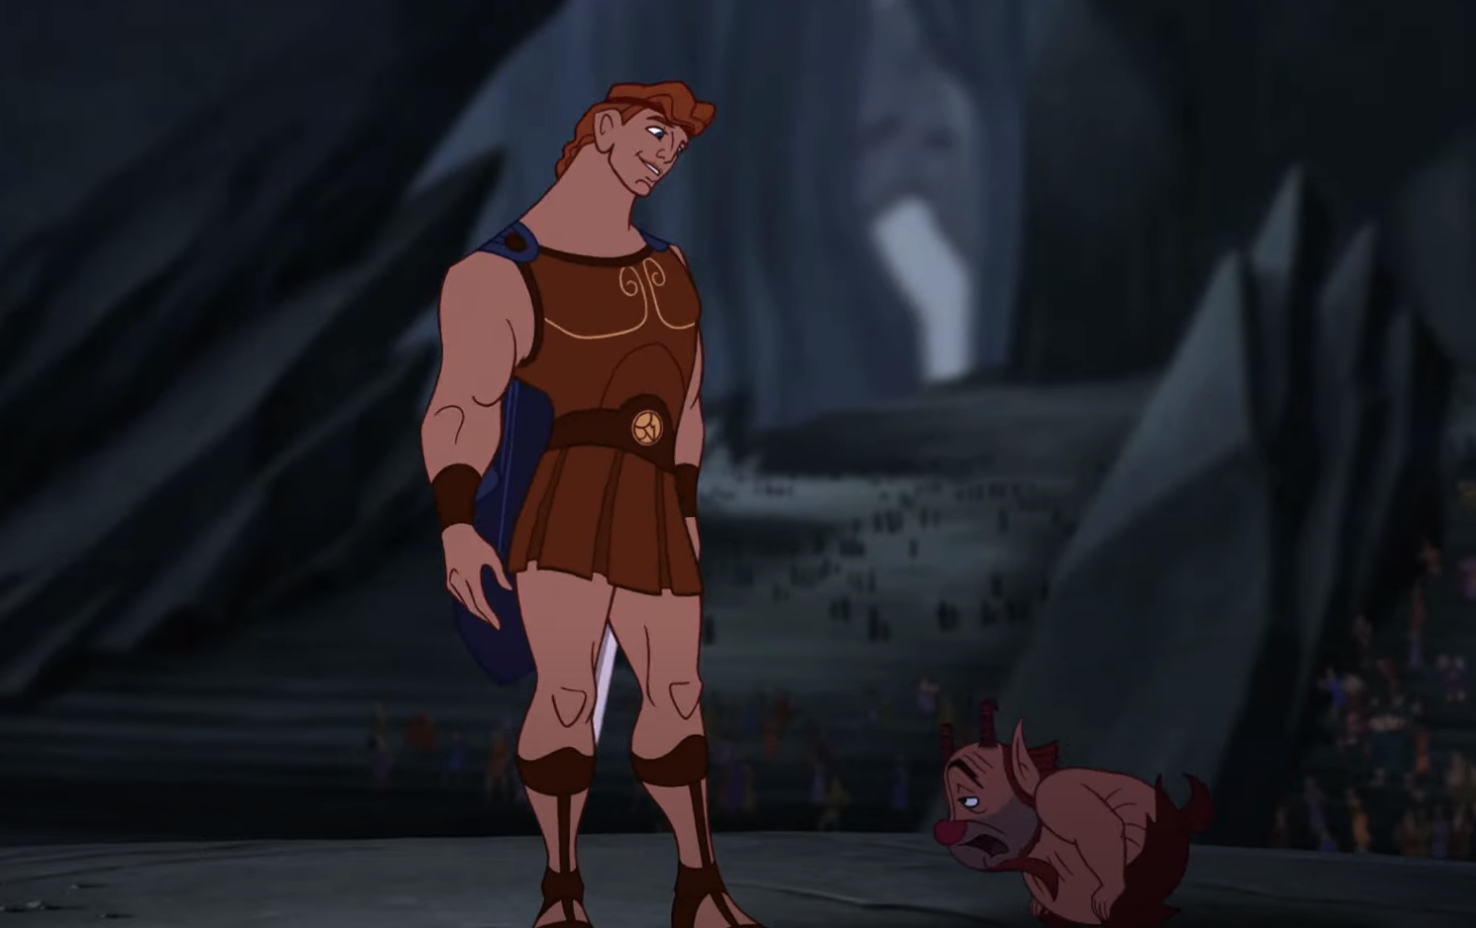 Hercules and Pegasus look concerned in a scene from the animated film &quot;Hercules.&quot;